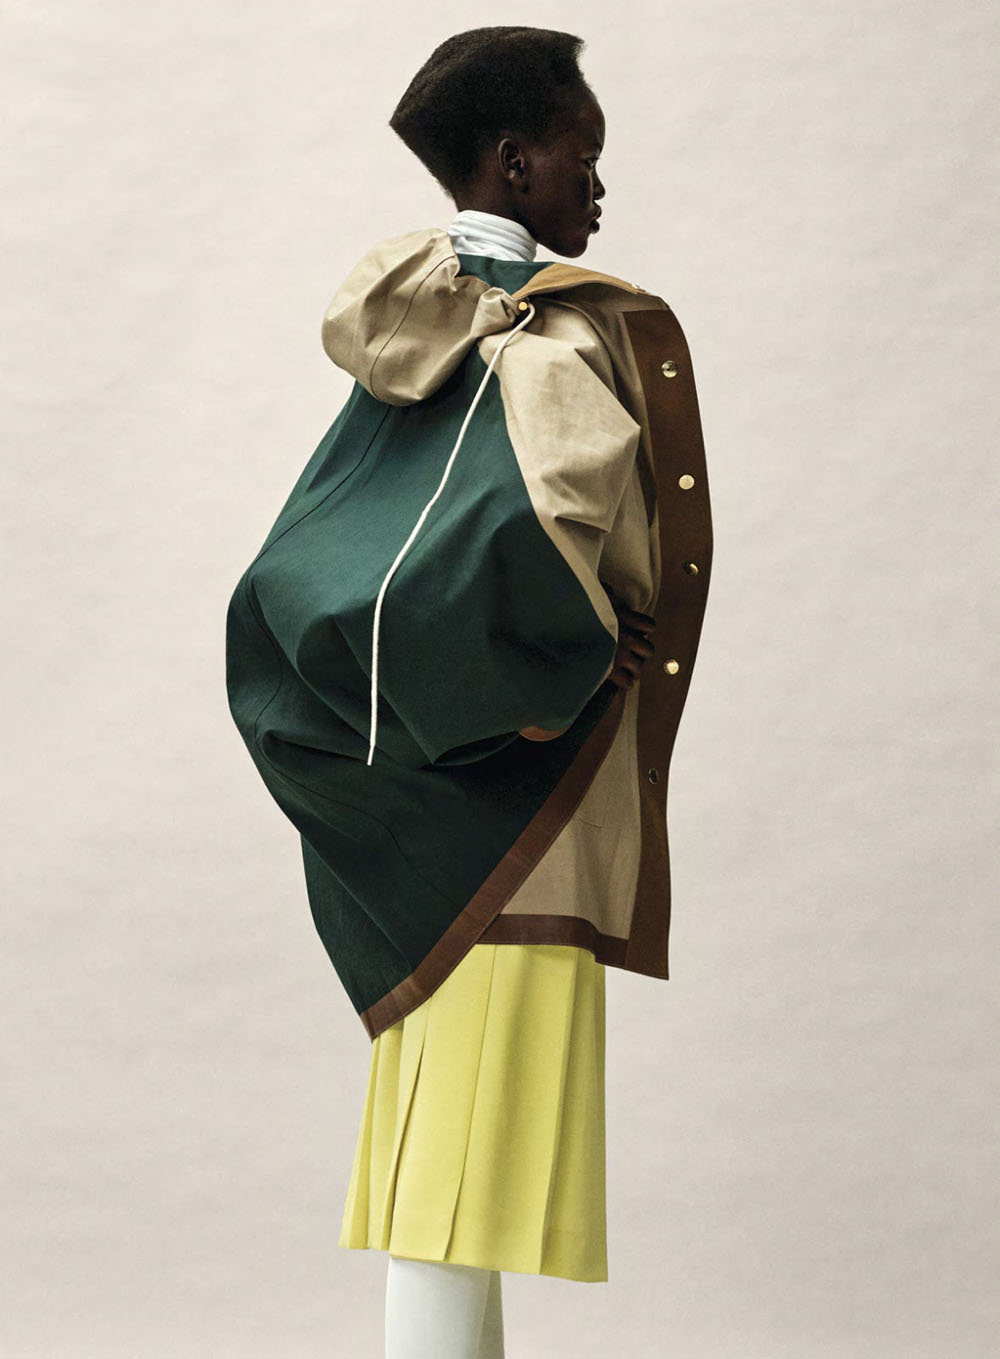 Adut Akech by Josh Olins for Vogue US January 2019